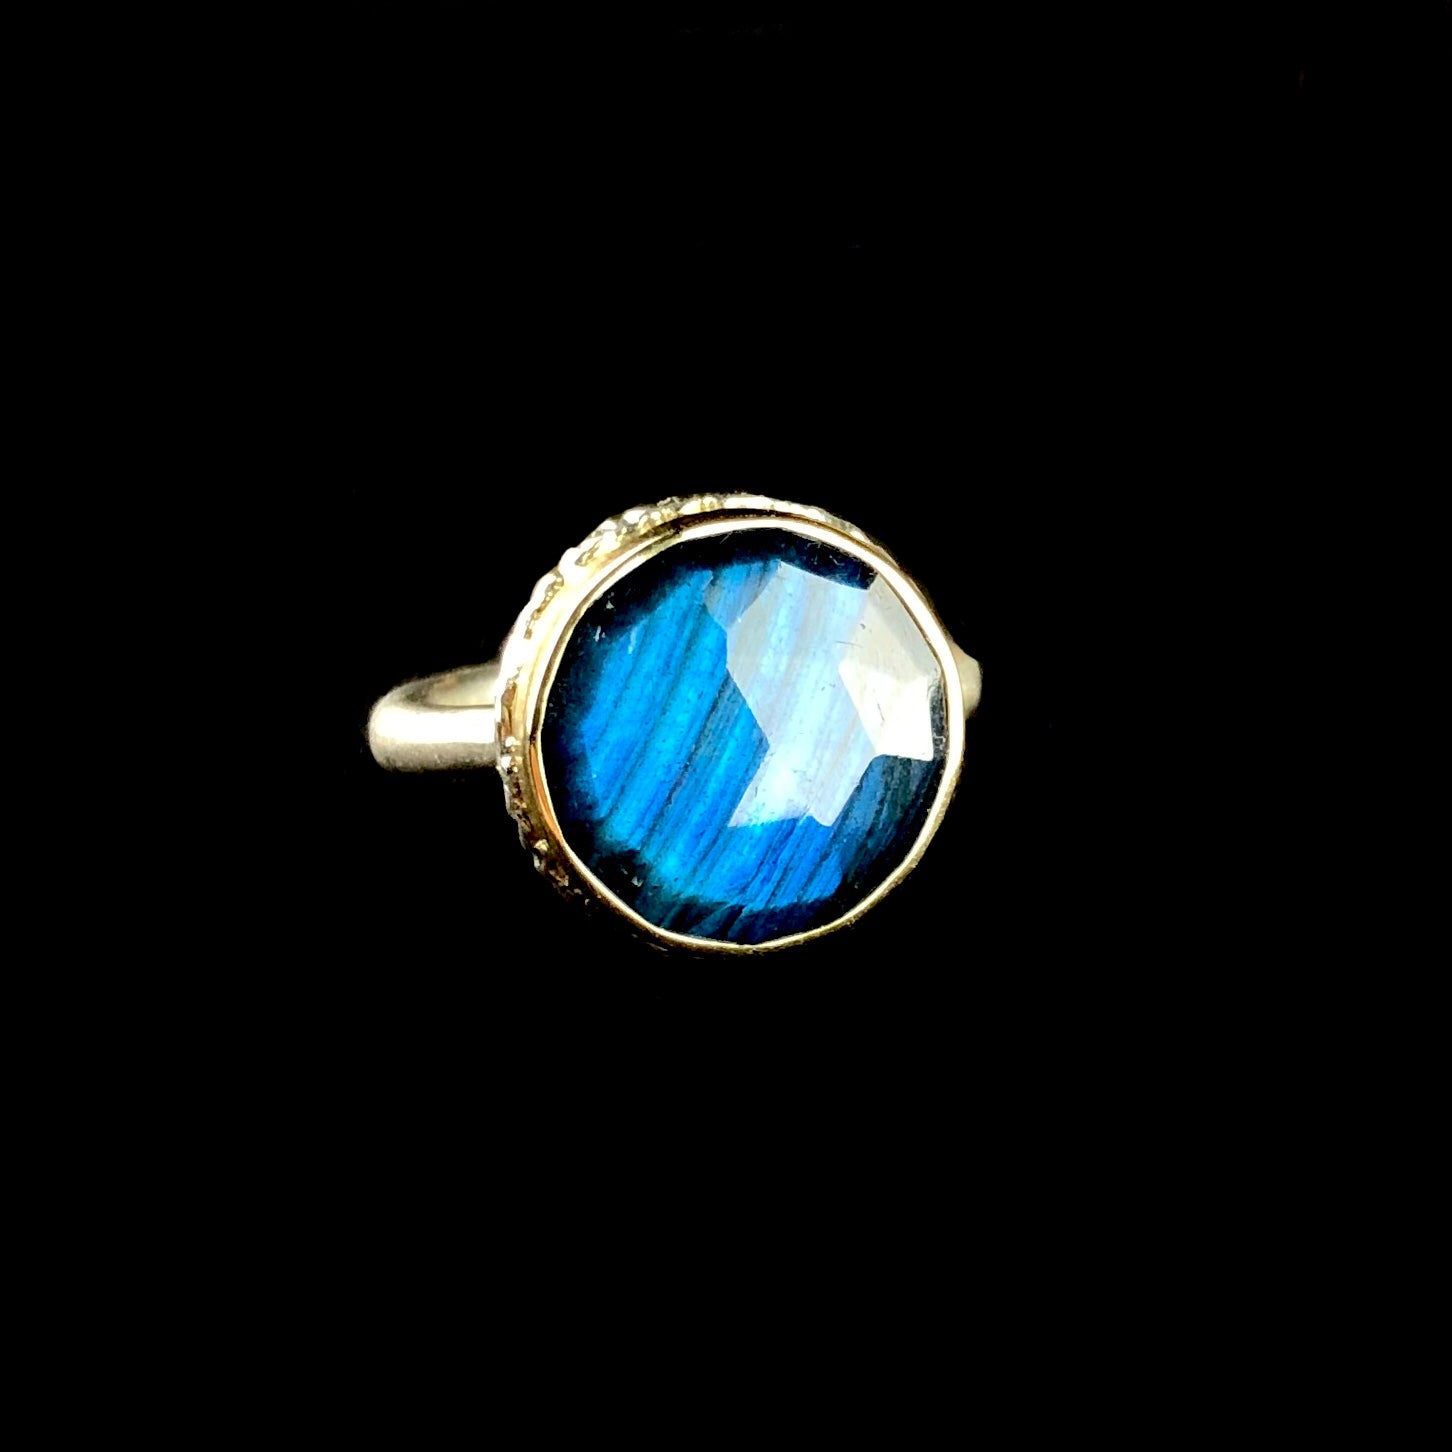 Front view of round iridescent blue/green stone ring